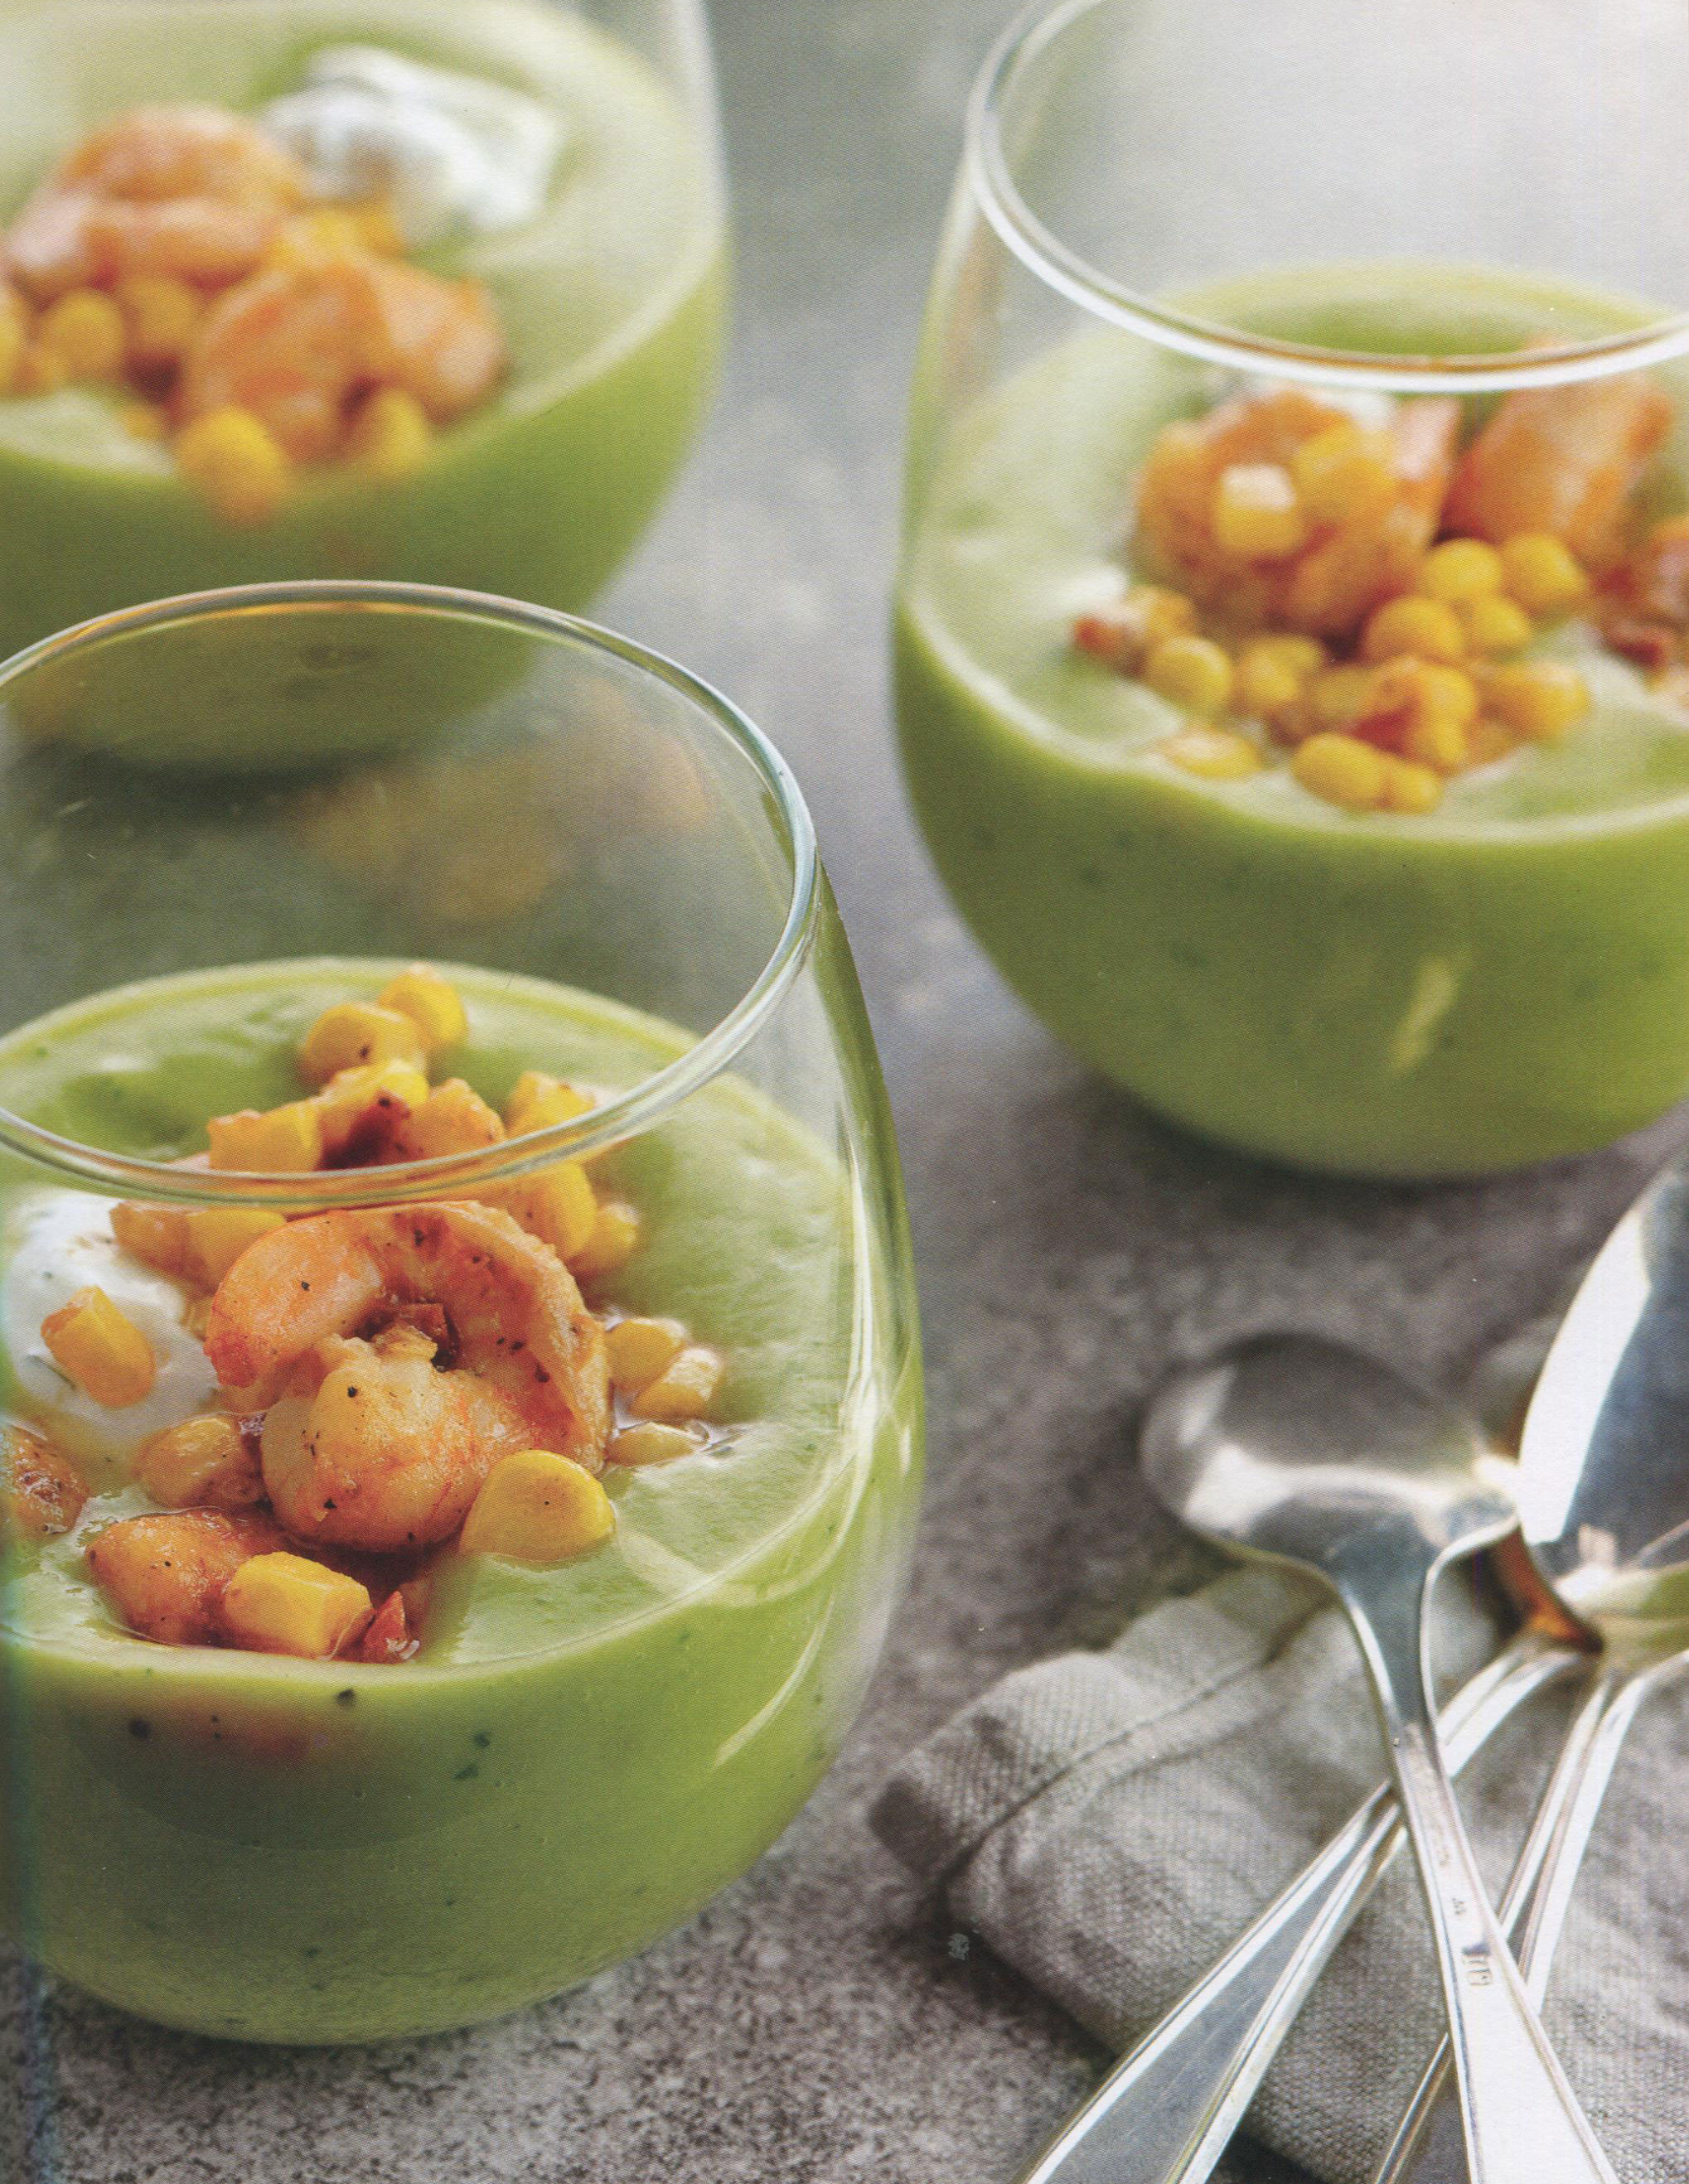 TBT Recipe: Avocado Soup with Lime Cream and Seared Chipotle Shrimp